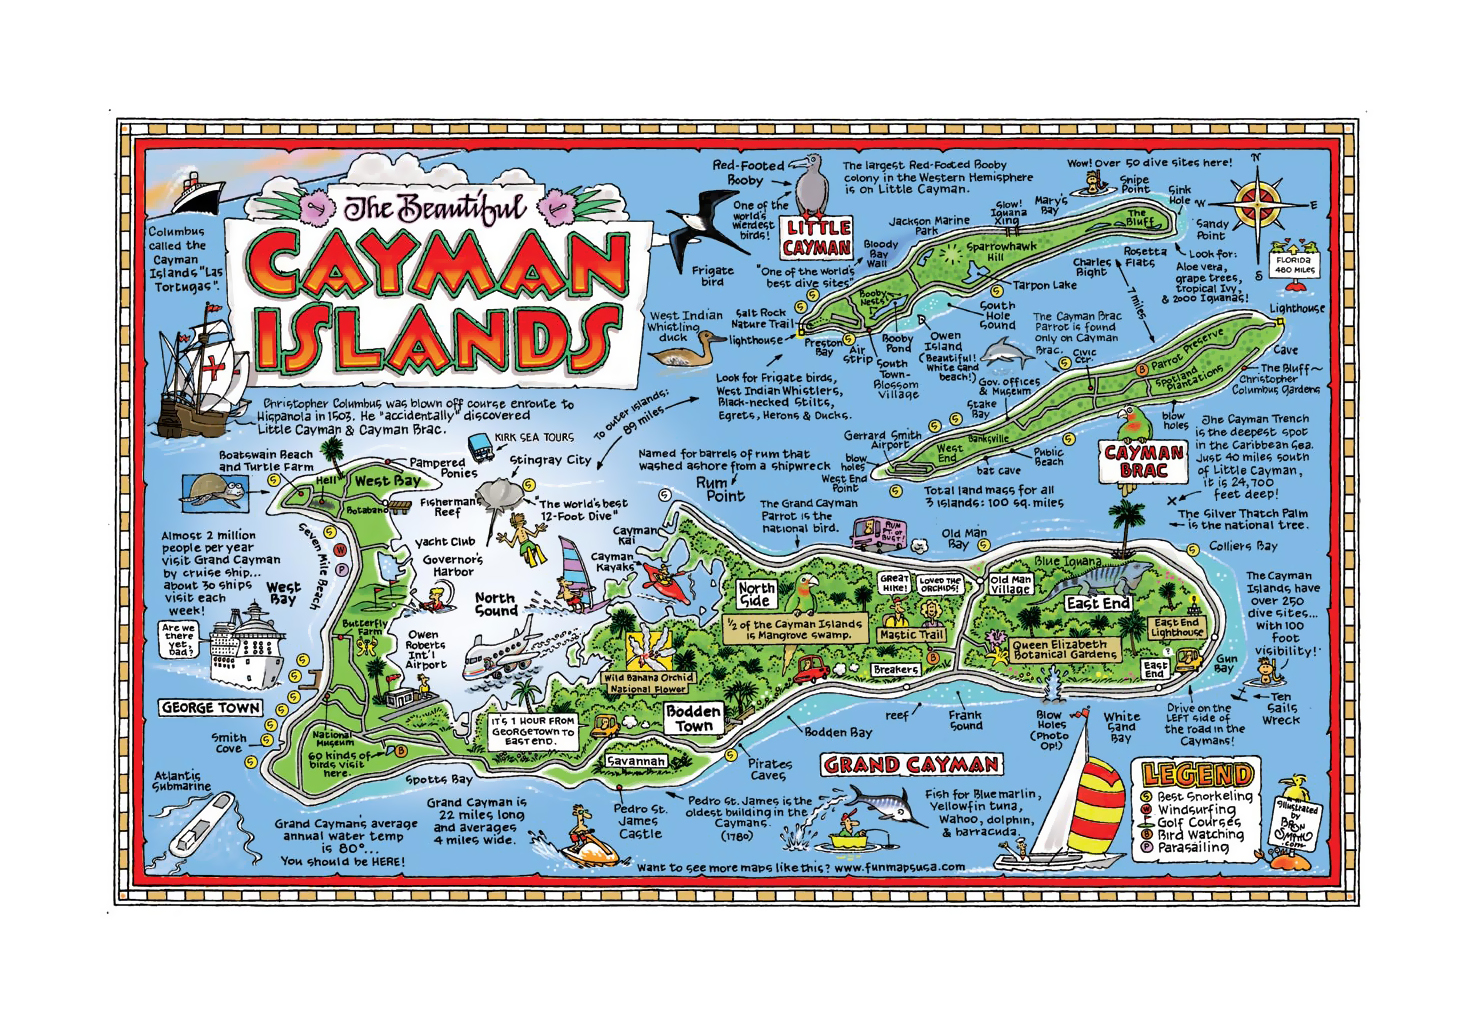 Large Travel Illustrated Map Of Cayman Islands Cayman Islands North America Mapsland Maps Of The World